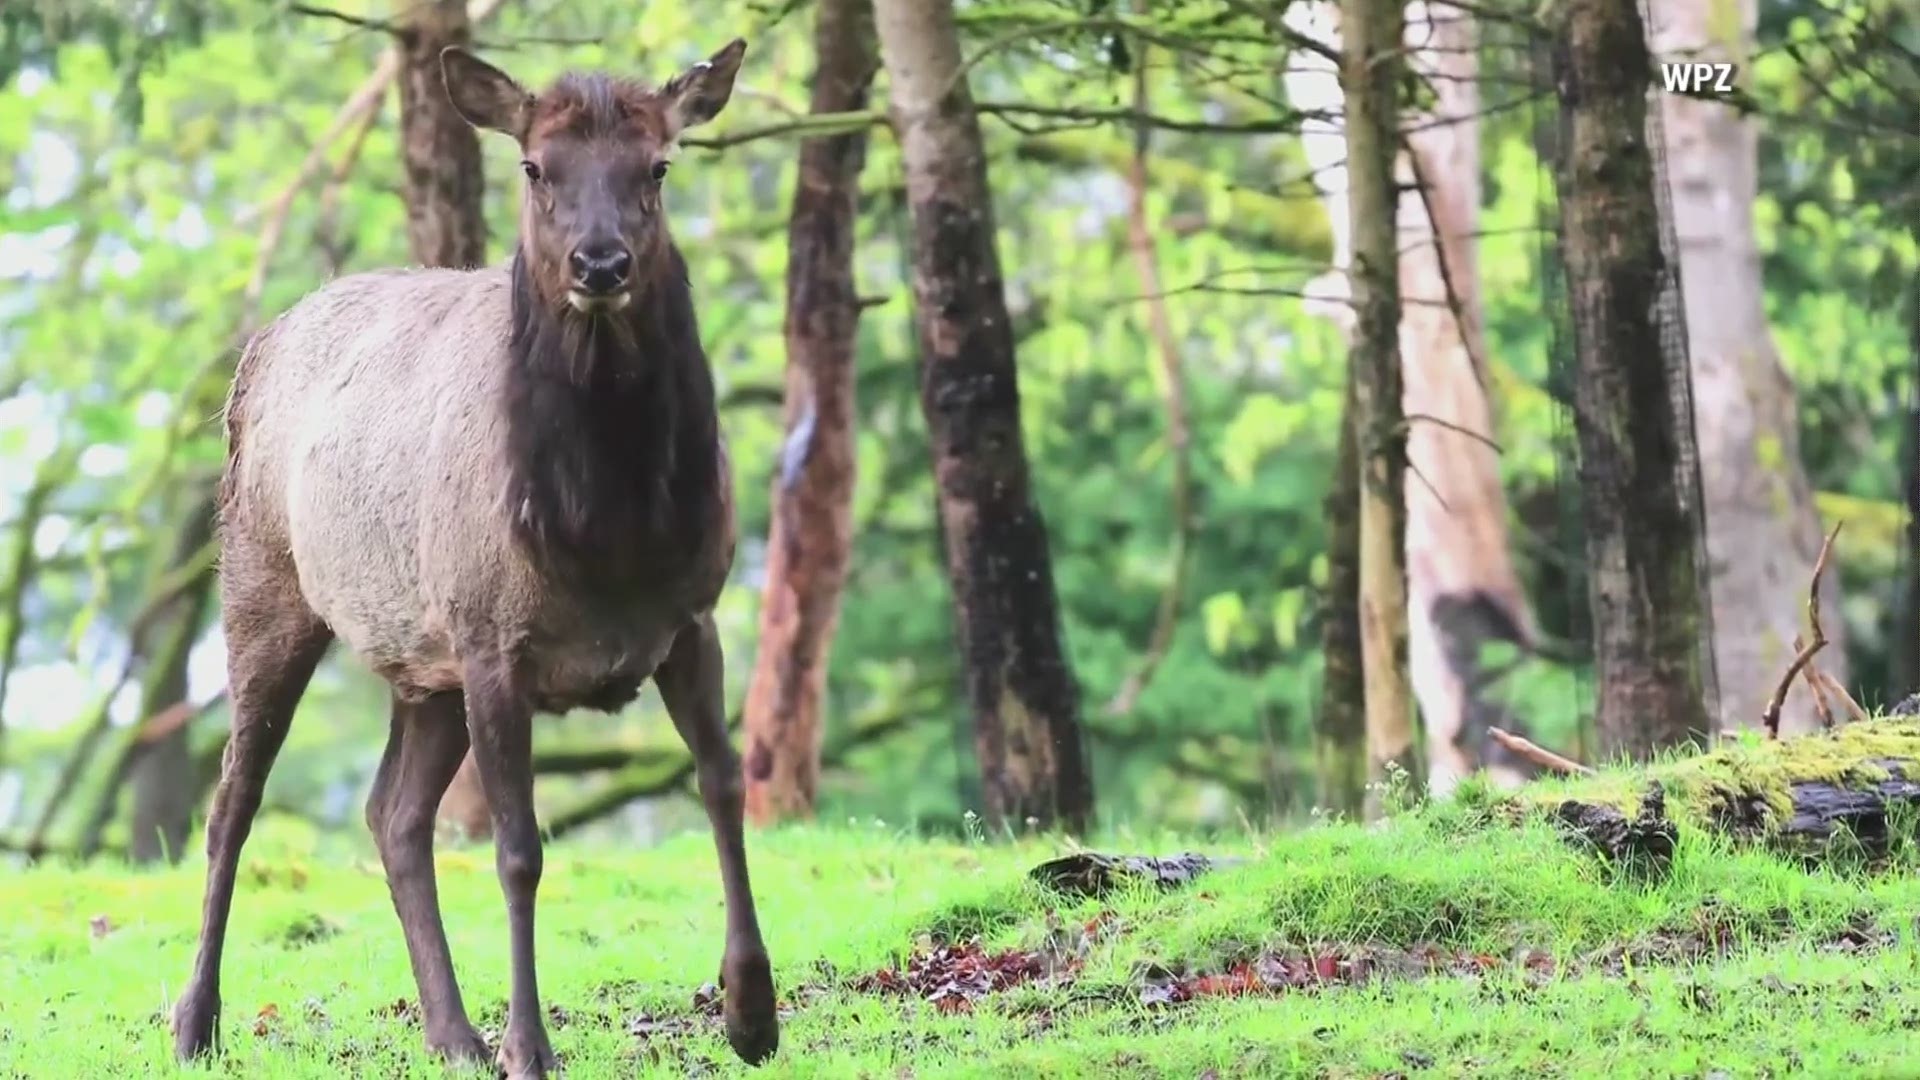 Buttons the elk debuts at Woodland Park Zoo. Video provided by the zoo.